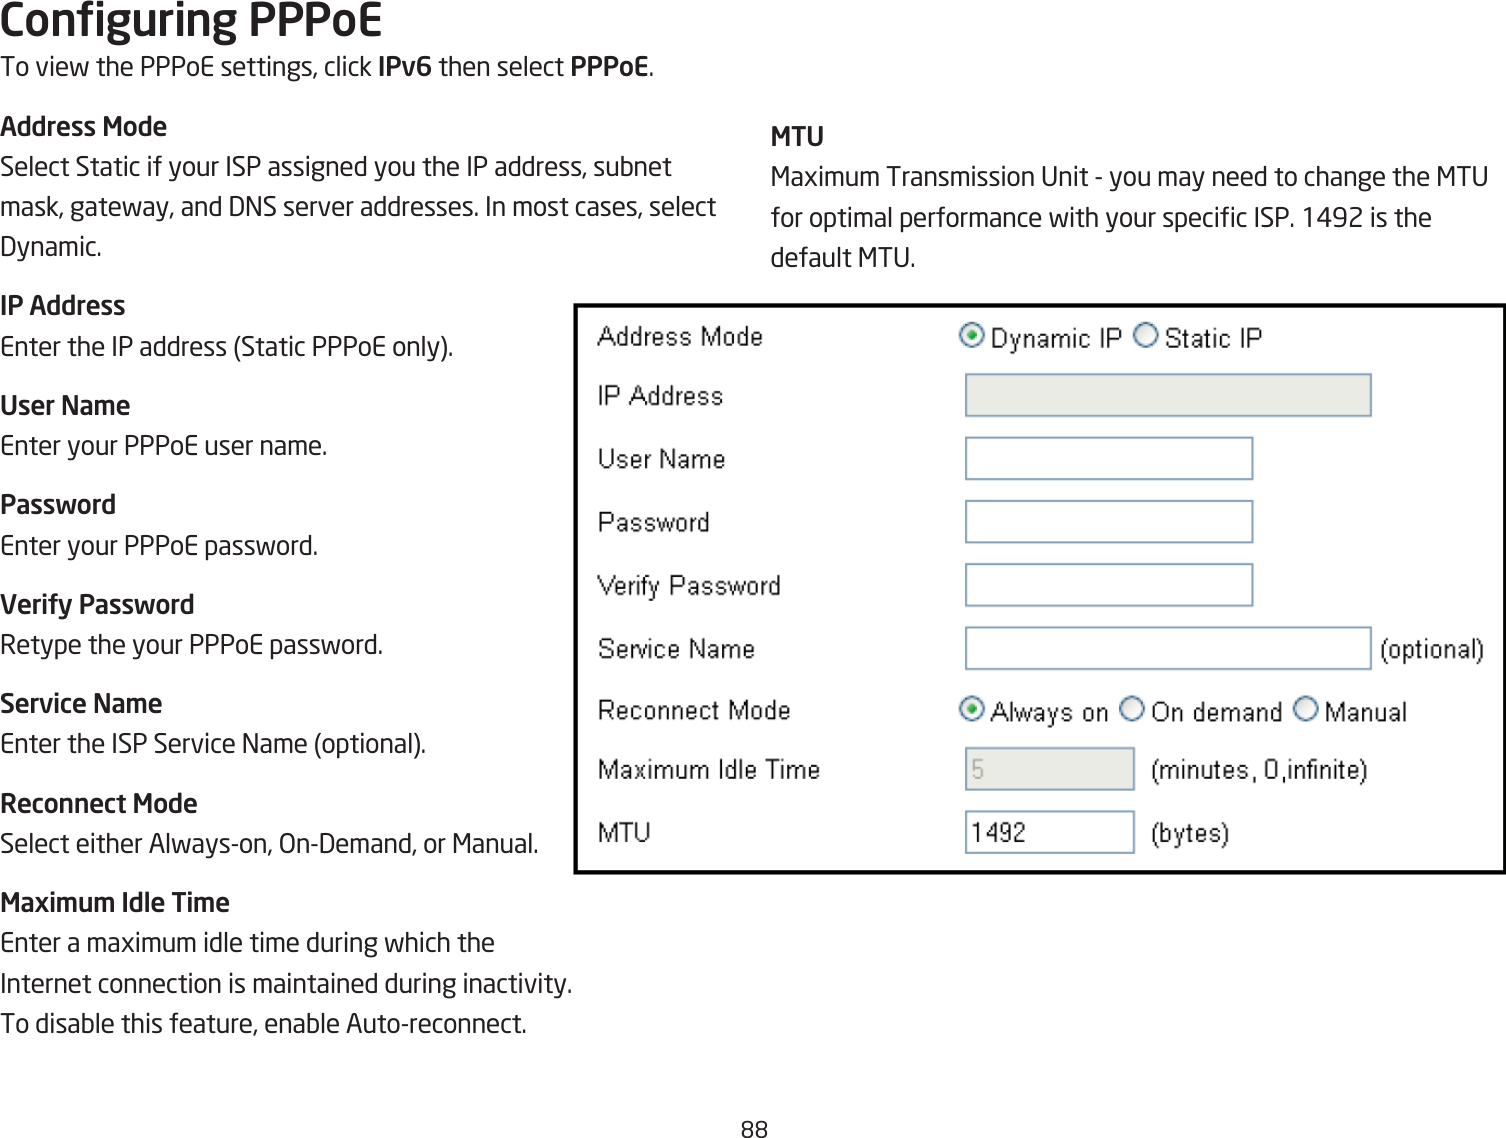 &apos;&apos;Conguring PPPoETo vief the PPPoE settings, click IPv6 then select PPPoE.Address ModeSelect Static if your ISP assigned you the IP address, suQnet mask, gatefay, and 3=S server addresses. In most cases, select 3ynamic.IP AddressEnter the IP address Static PPPoE only.User Na\eEnter your PPPoE user name.PasswordEnter your PPPoE passford.VeriUy PasswordRetype the your PPPoE passford.Service Na\eEnter the ISP Service =ame optional.Reconnect ModeSelect either Alfayson, &gt;n3emand, or &lt;anual.Maxi\u\ Idle Ti\eEnter a magimum idle time during fhich the Internet connection is maintained during inactivity. To disaQle this feature, enaQle Autoreconnect.MTU&lt;agimum Transmission Unit  you may need to change the &lt;TU for optimal performance fith your specic ISP. 1#92 is the default &lt;TU.